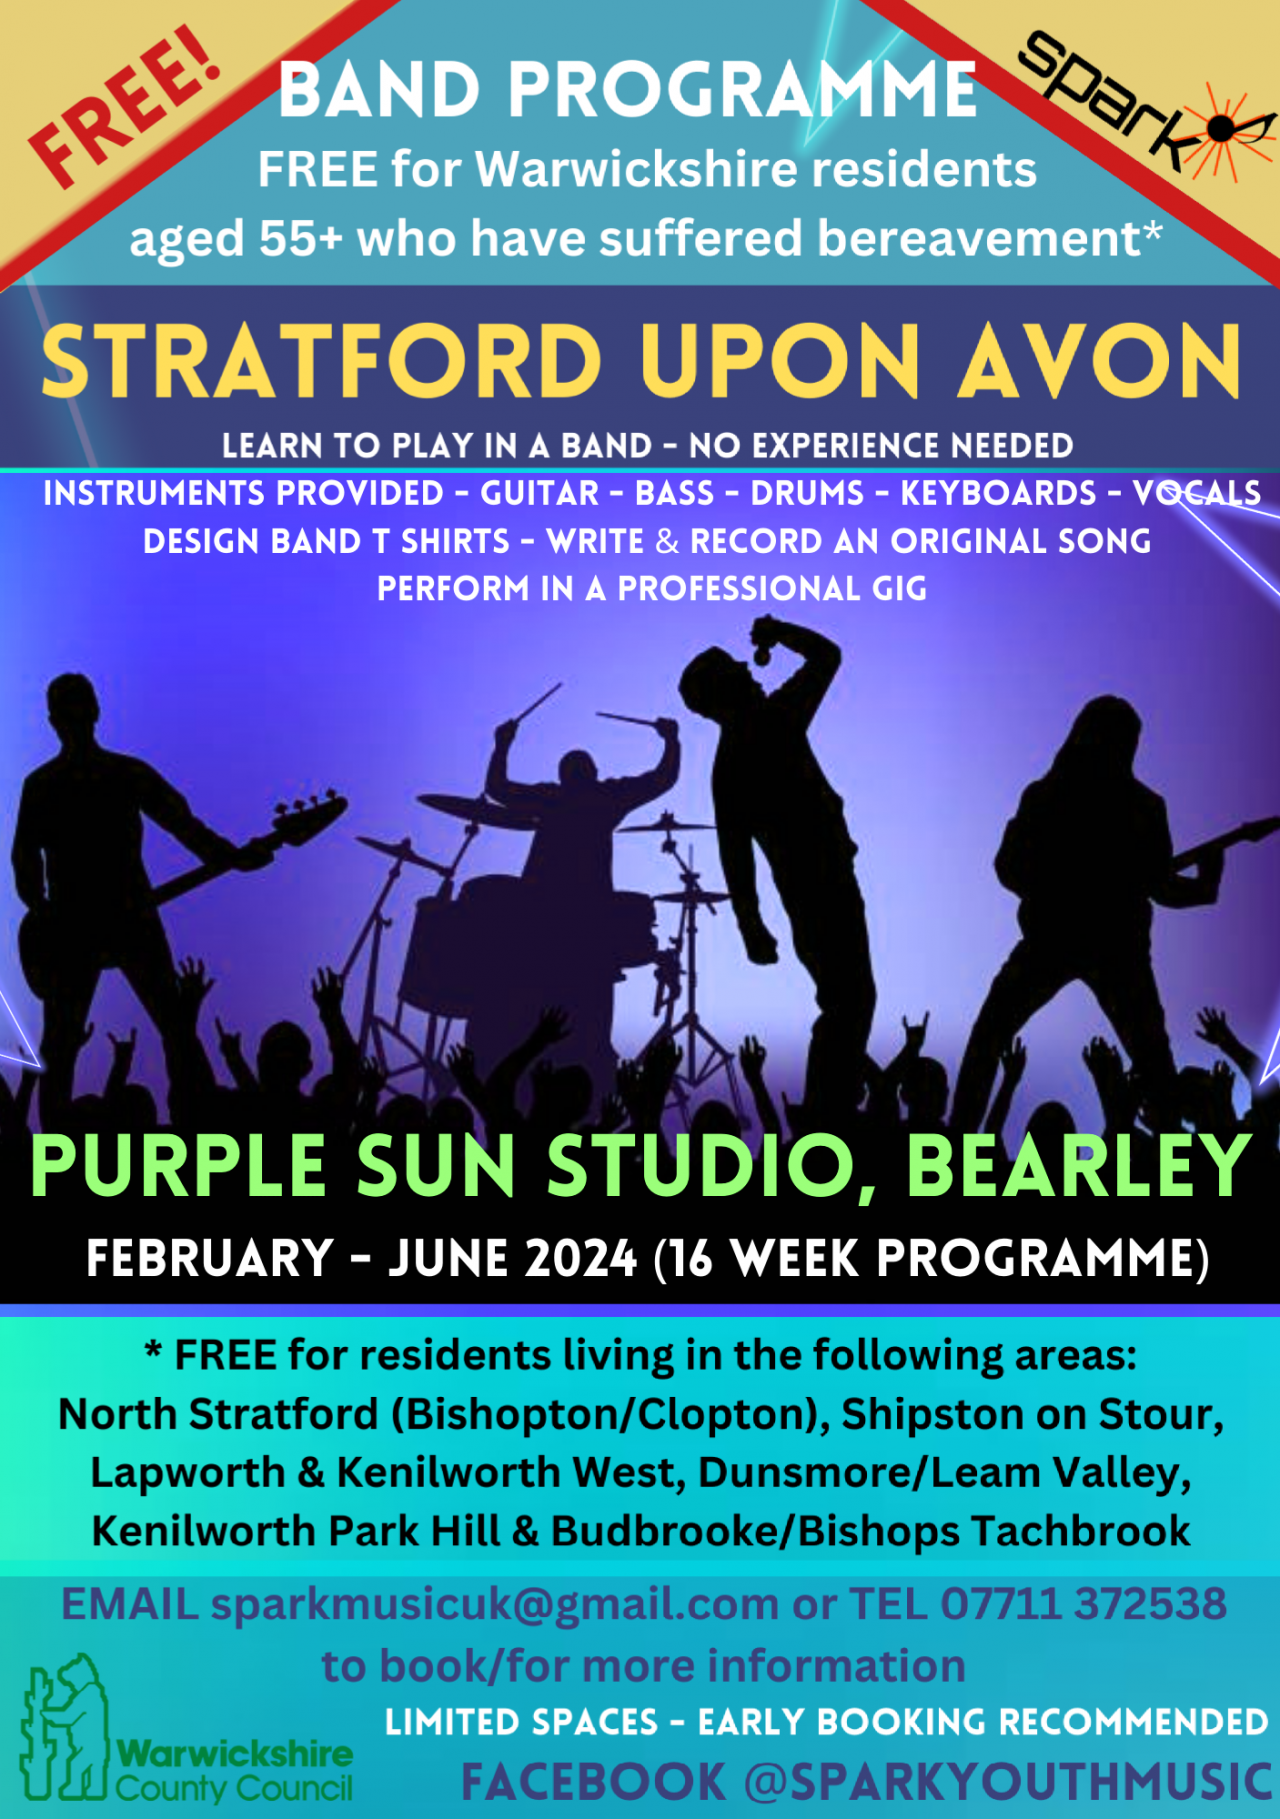 FREE Band Programme opportunity for Shipston on Stour residents